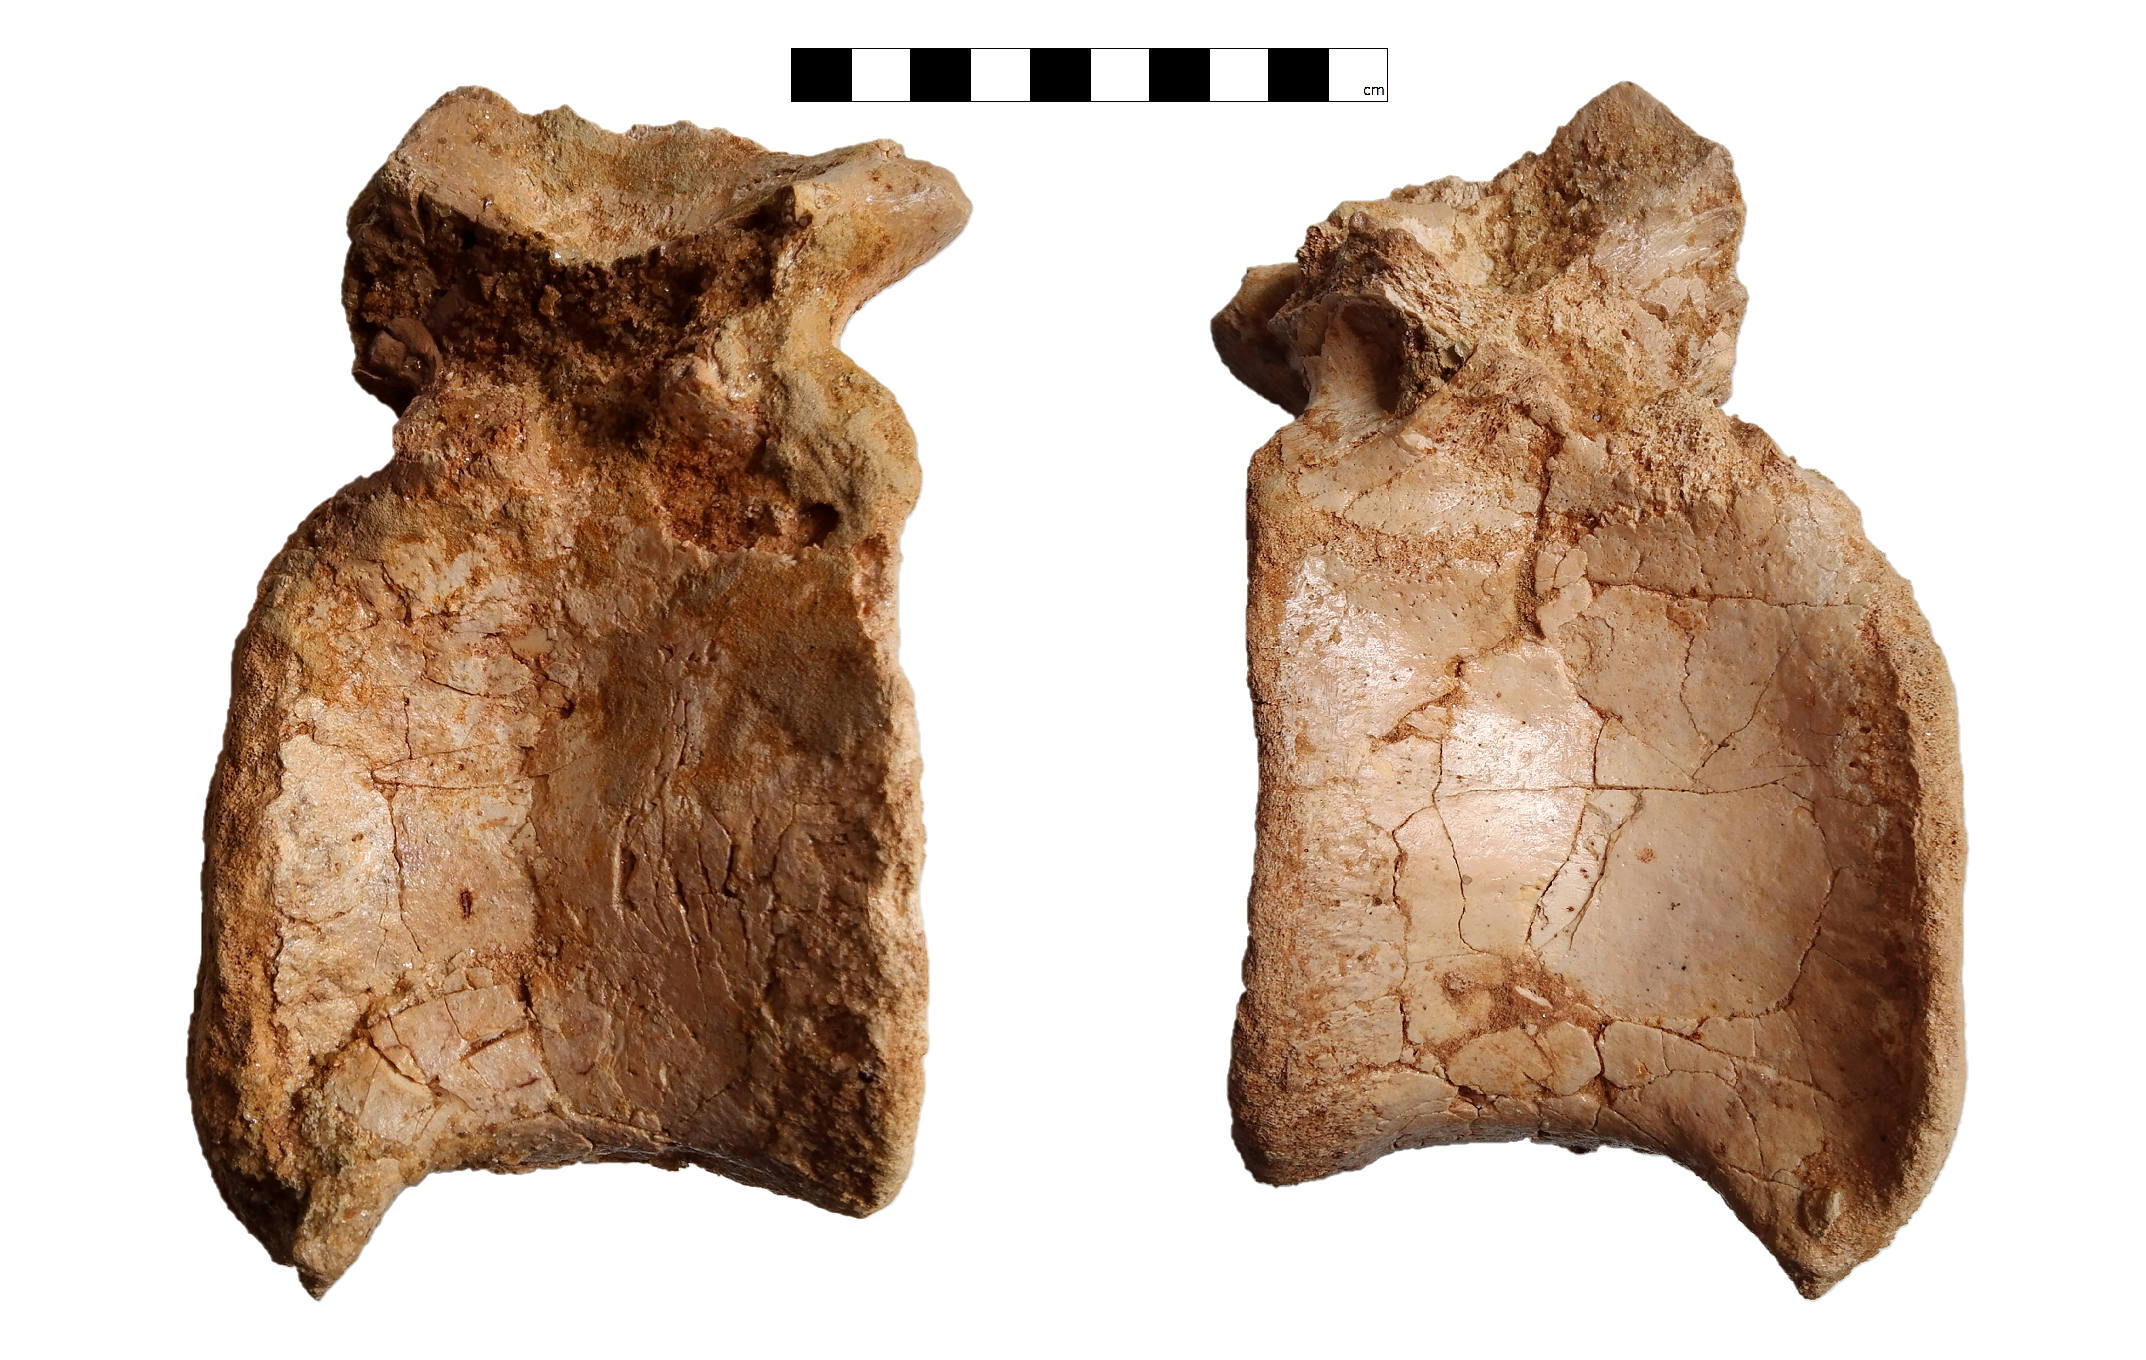 Proximal caudal vertebra (GCE2104146785) of Spinosaurid tentatively refer as Spinosaurus dorsojuvencus. From left image: in right lateral view (side view); Right image: in left lateral view